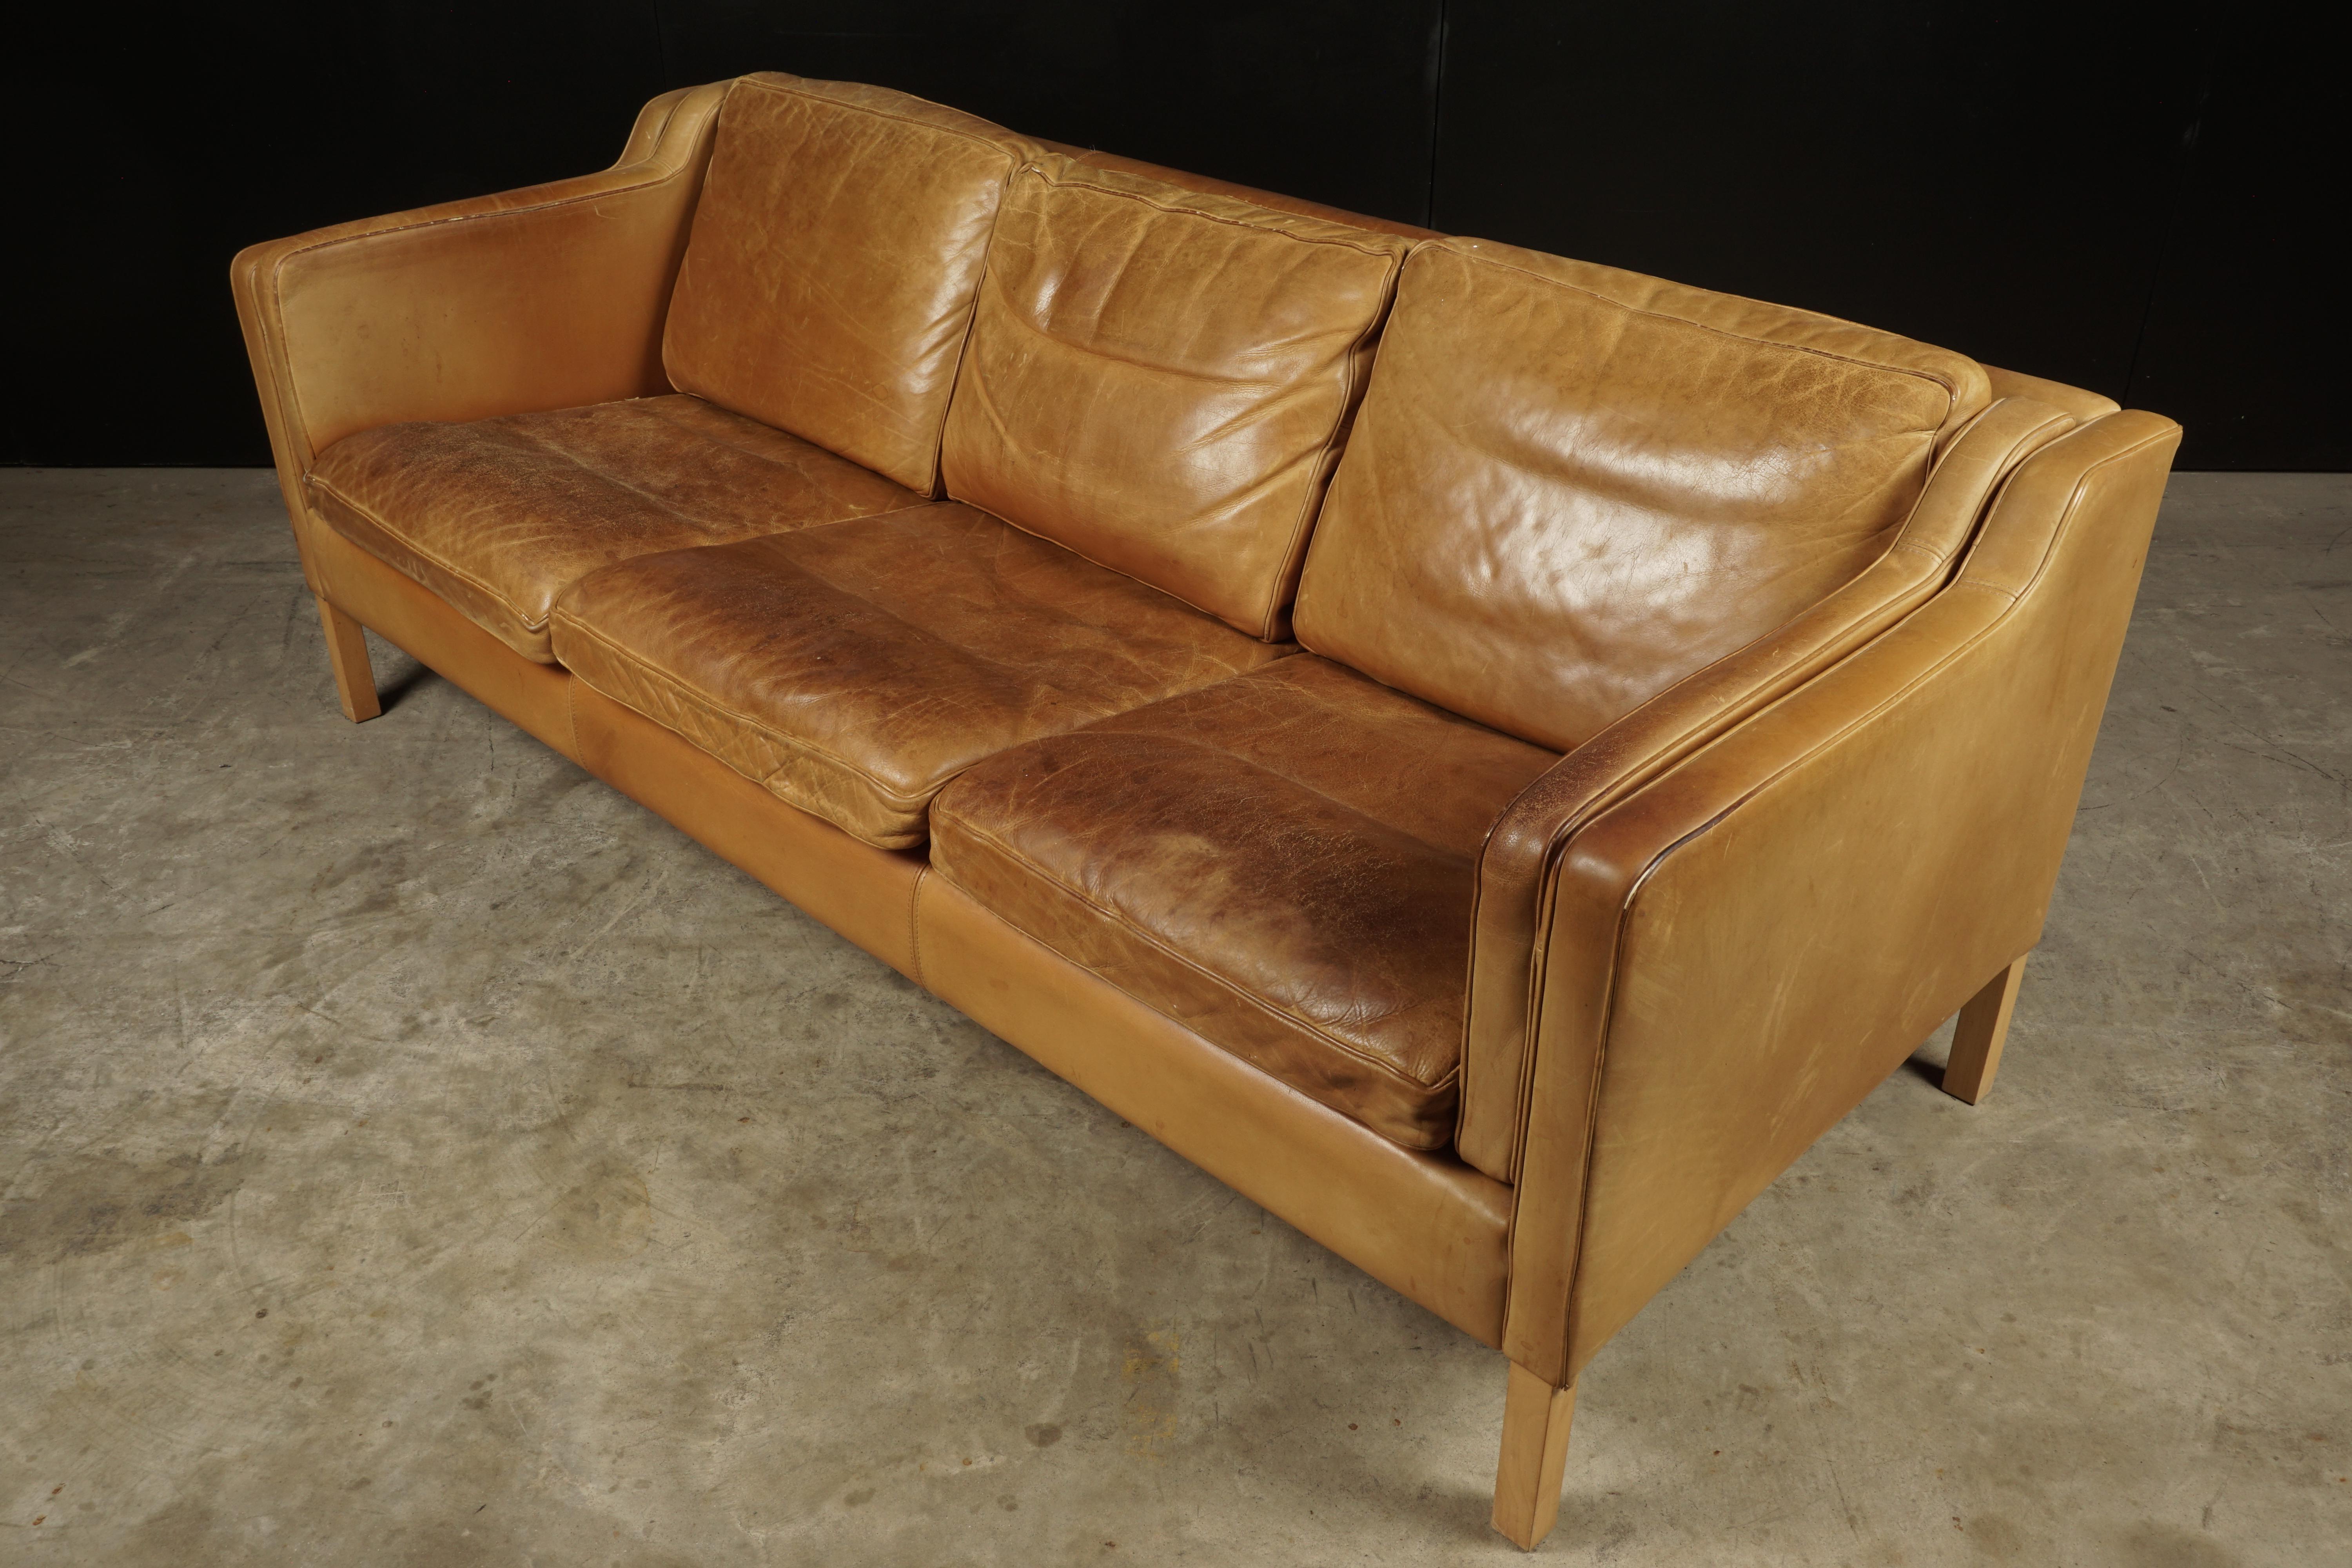 Midcentury sofa from Denmark in cognac leather, circa 1970. Three-seat with superb patina and wear.